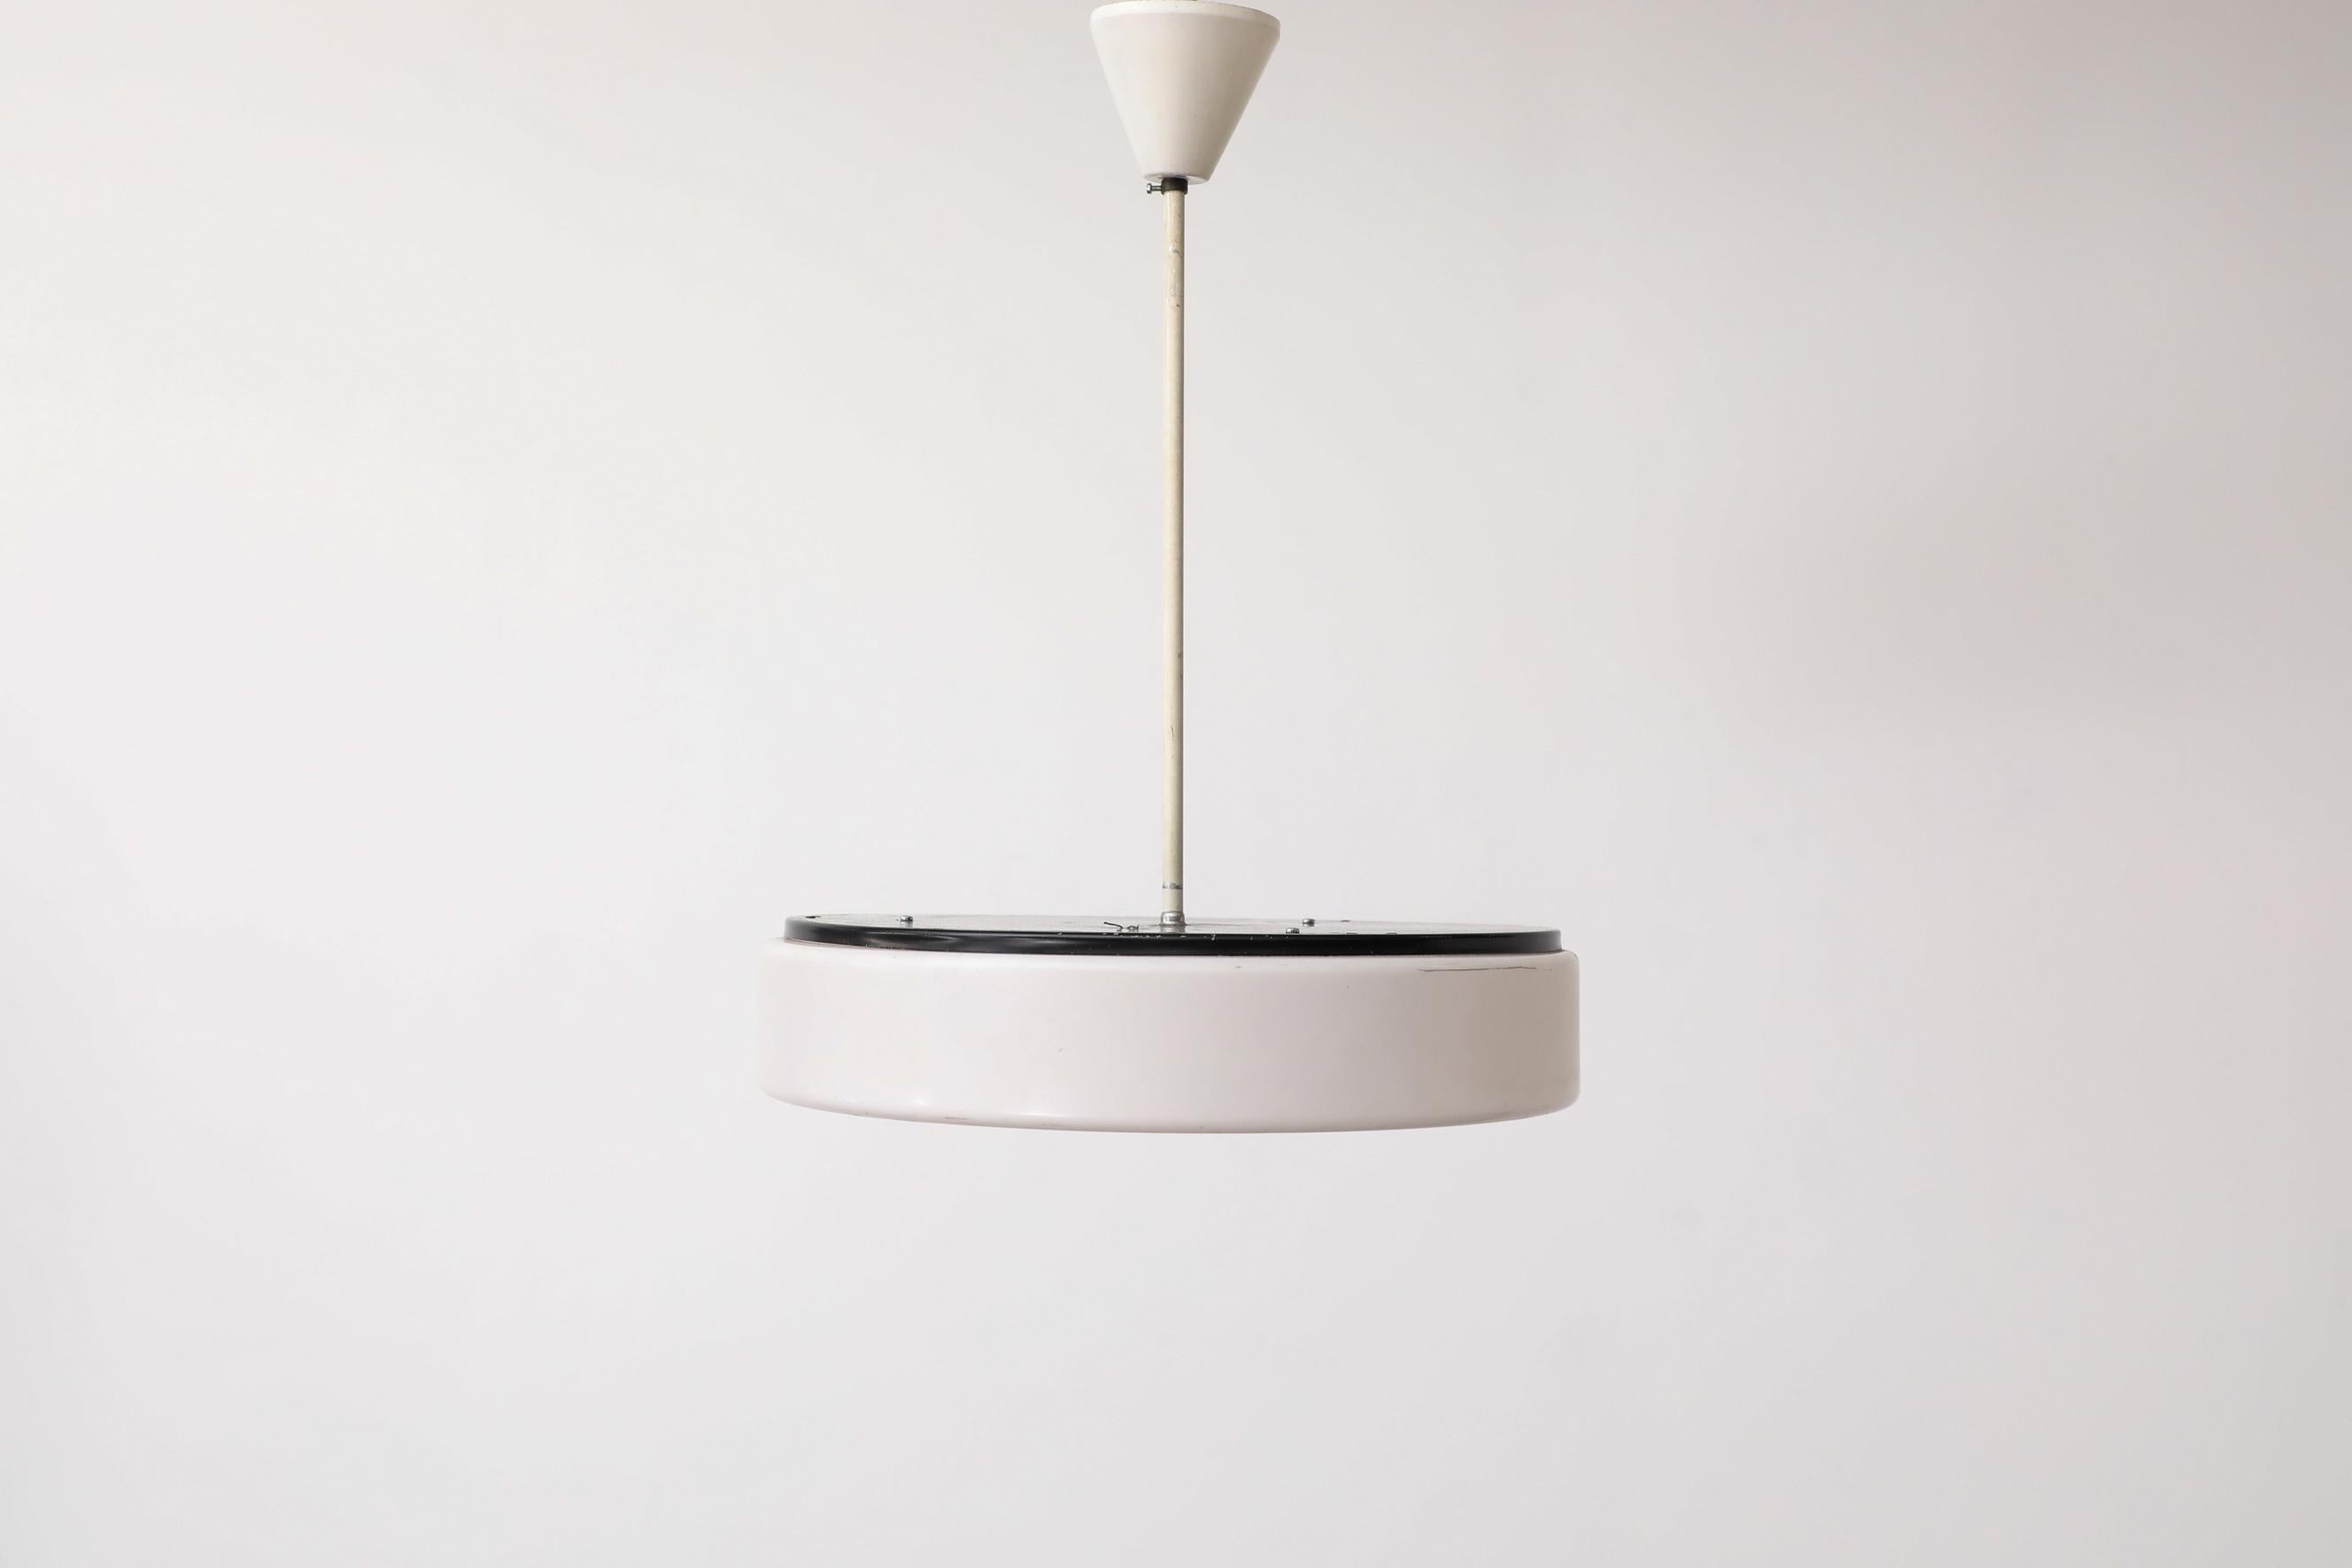 Vintage MOD pill pendant with white plexi glass shade, black enameled frame and original plastic canopy. It takes 3 light bulbs, LED recommended, as high wattage incandescent bulbs could melt the shade. In original condition with visible wear,